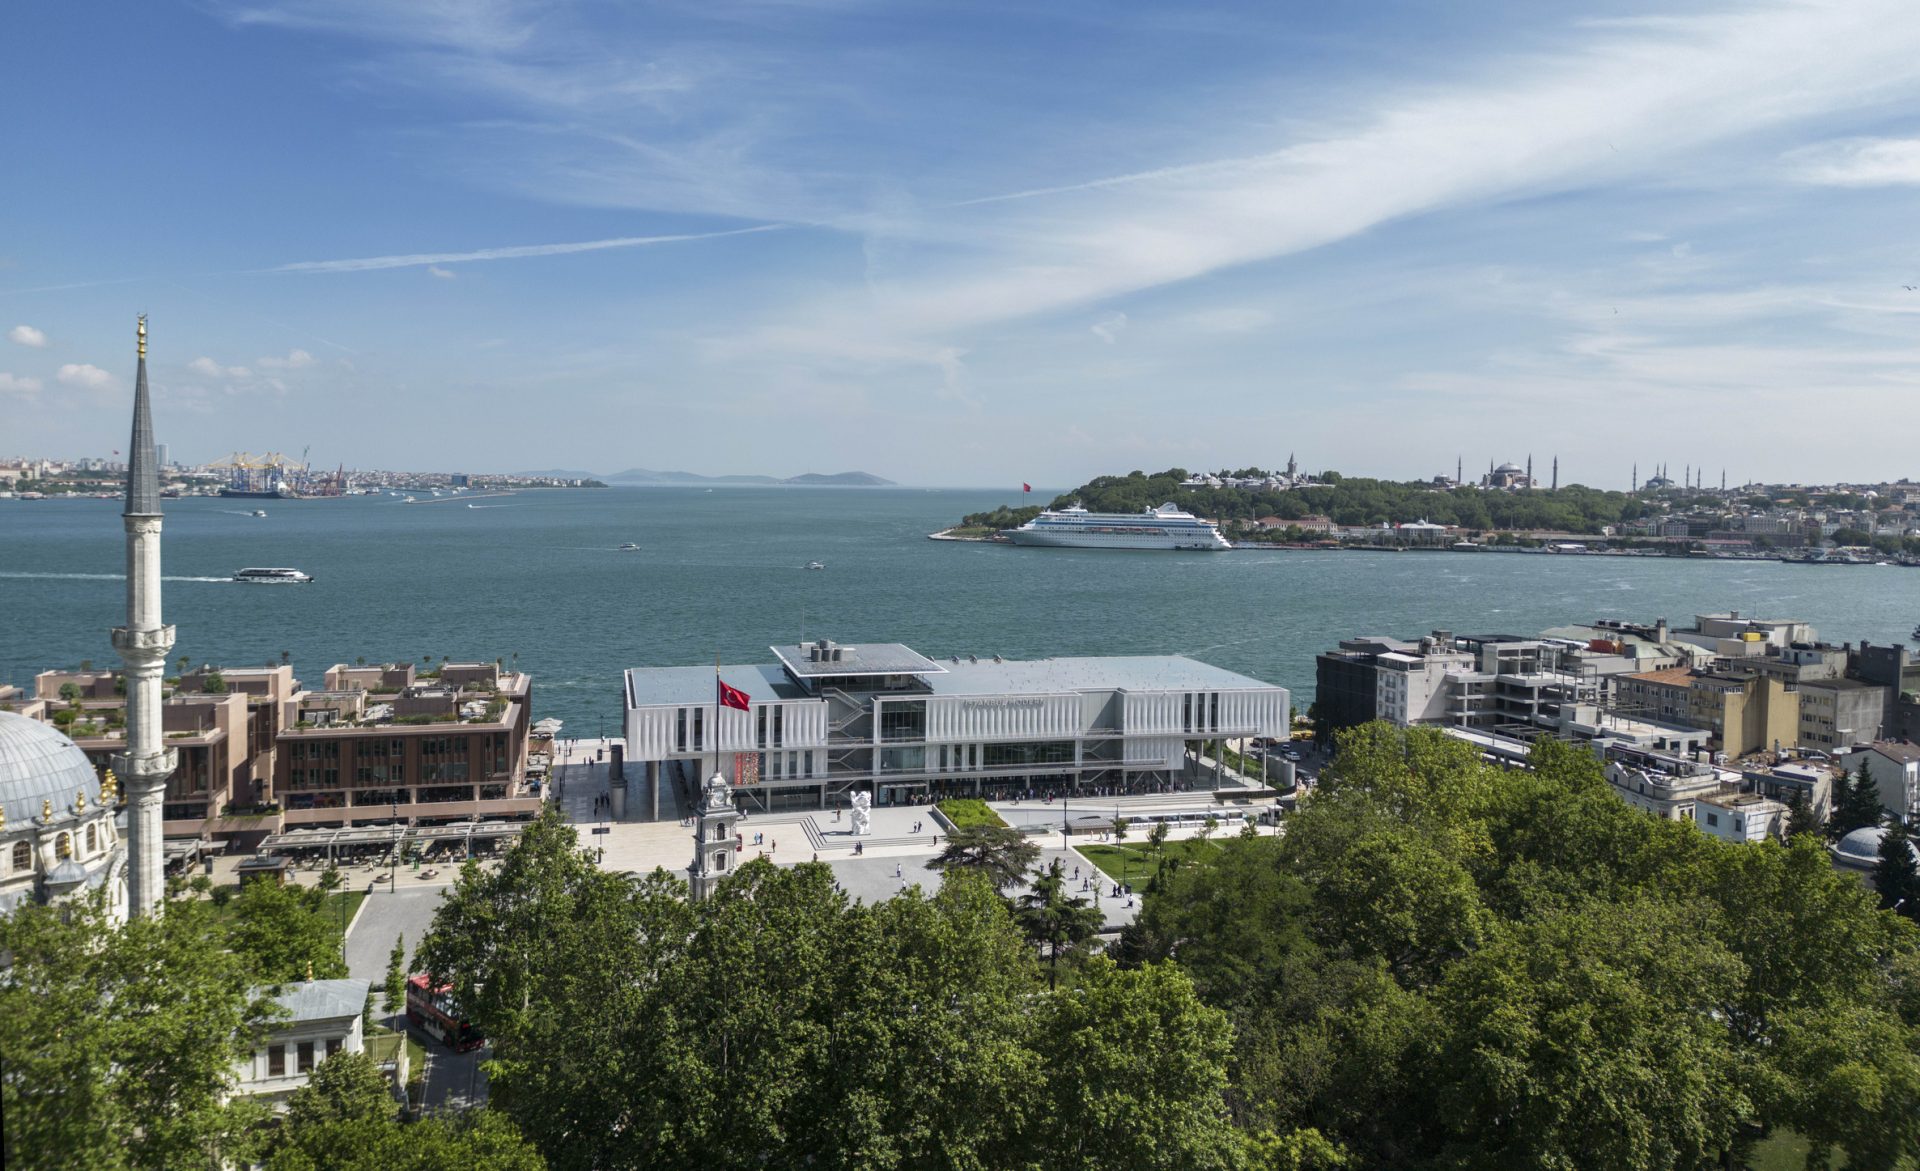 Istanbul Modern Museum design by Renzo Piano Building Workshop